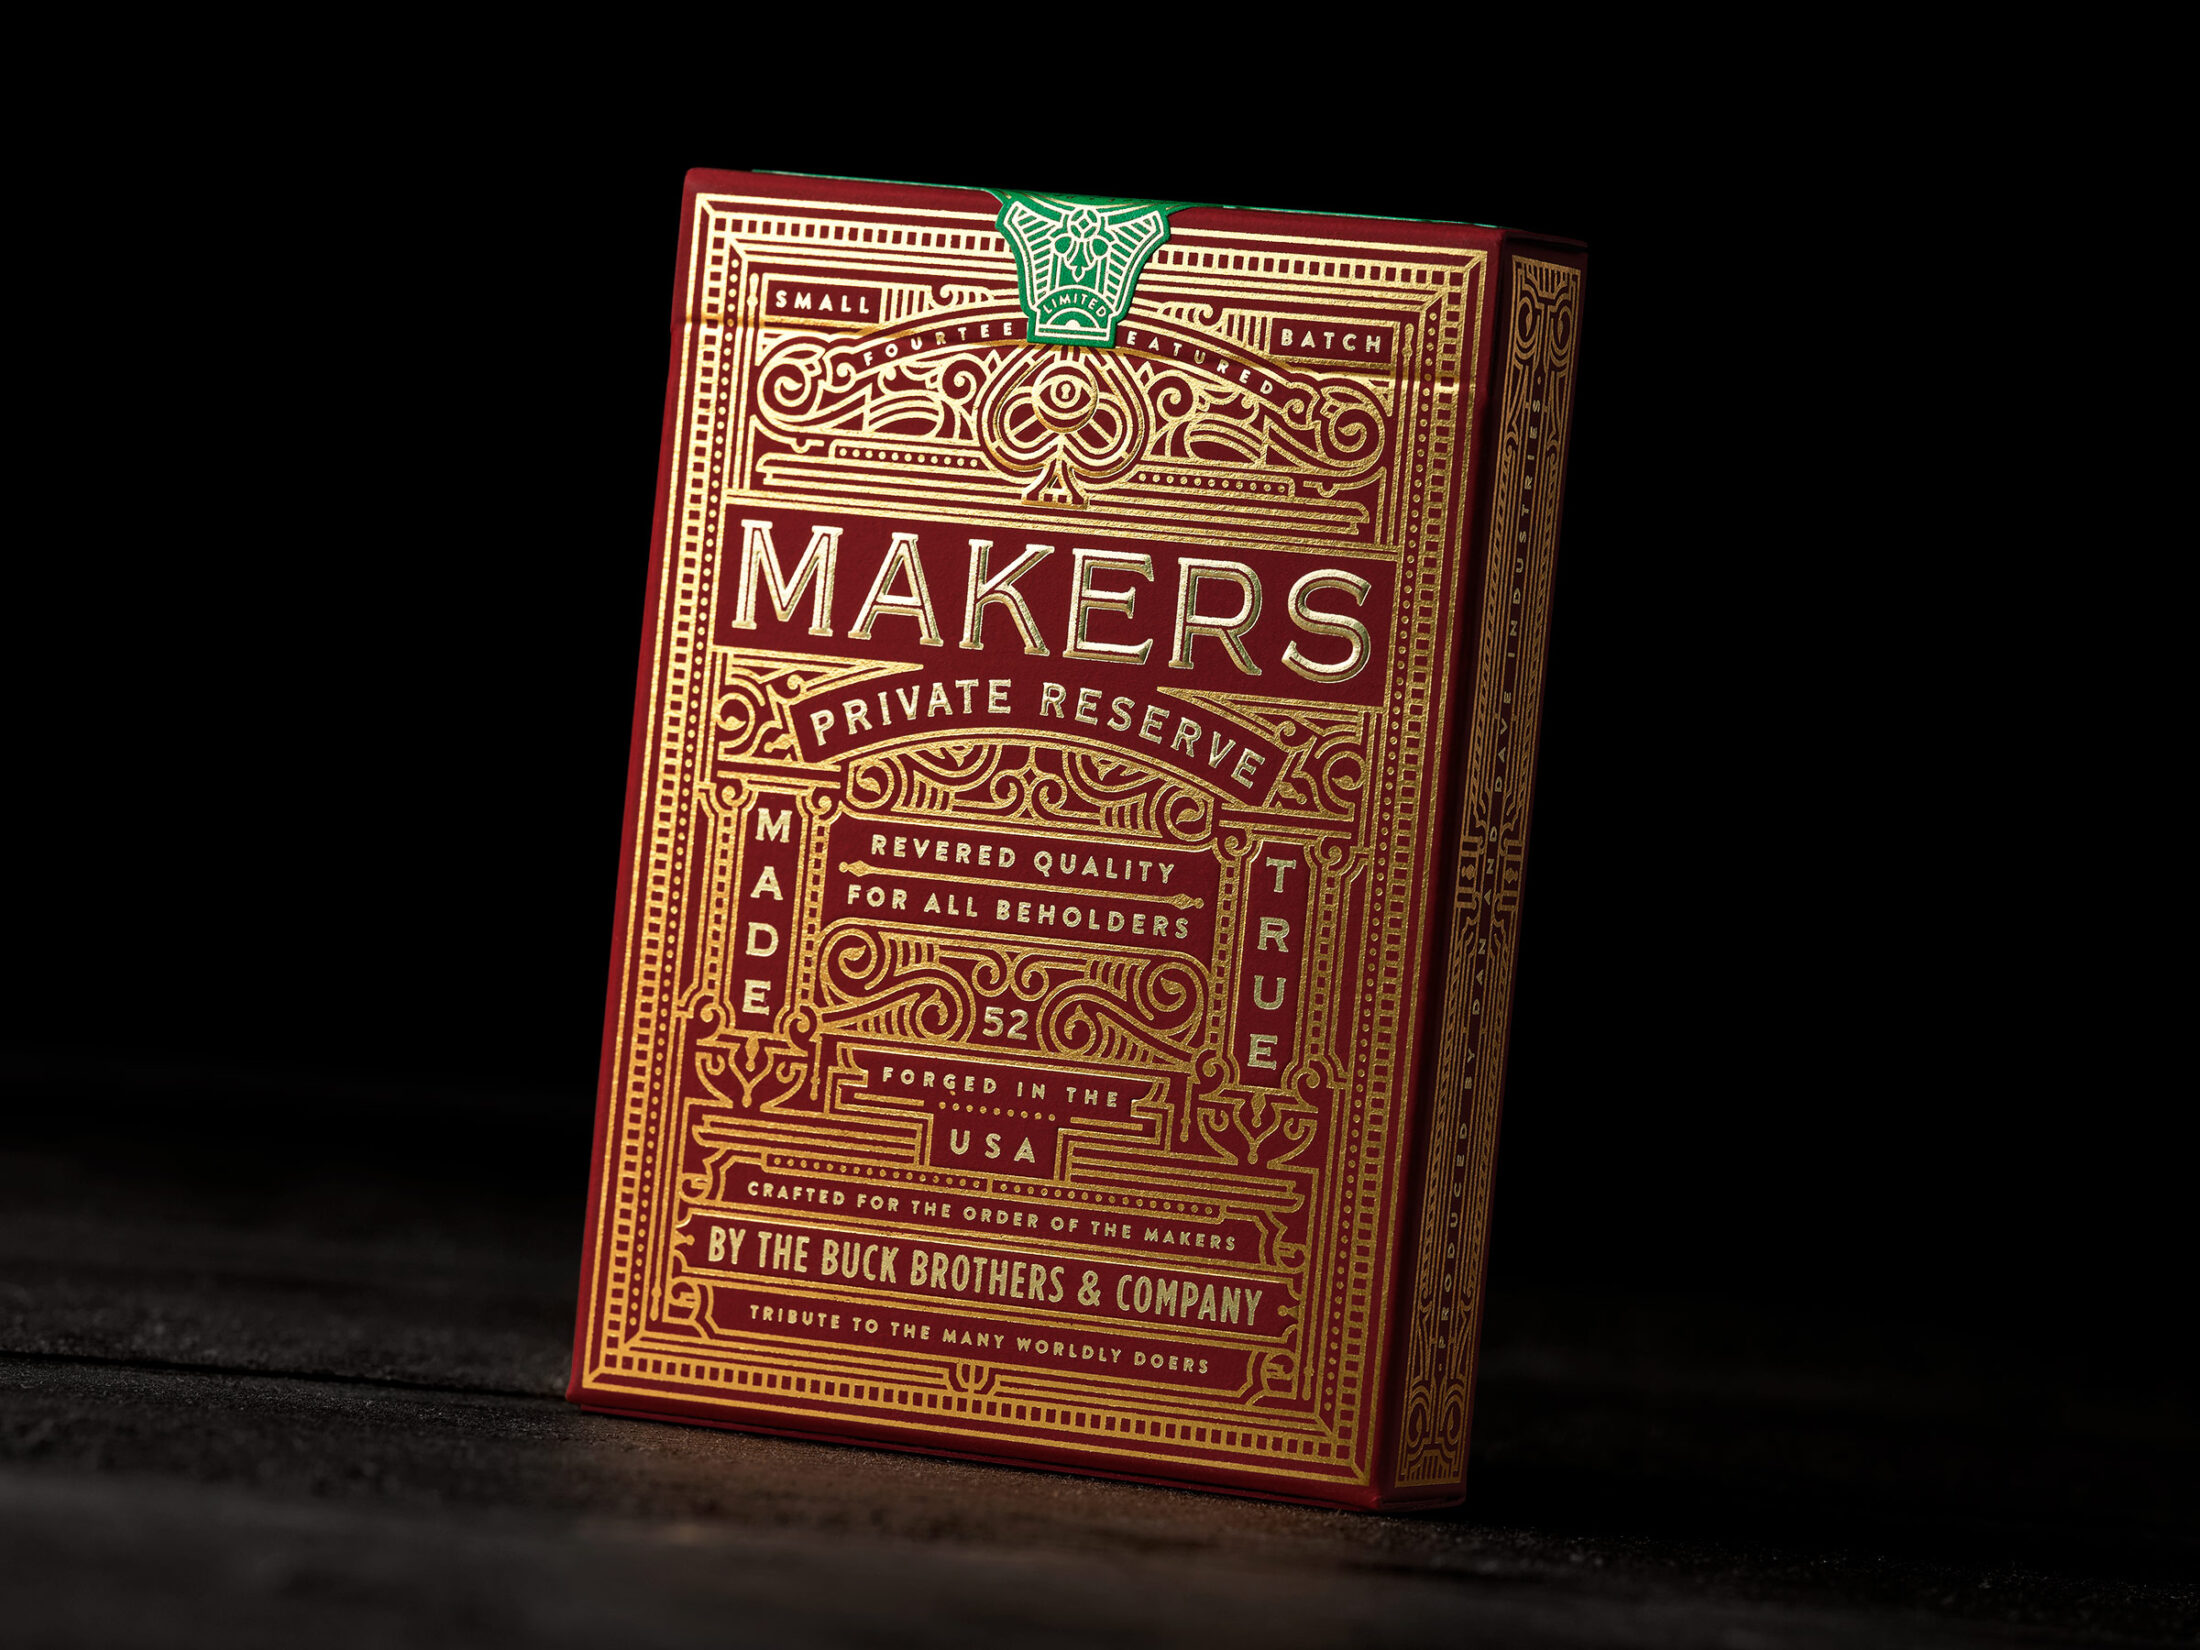 makers playing cards